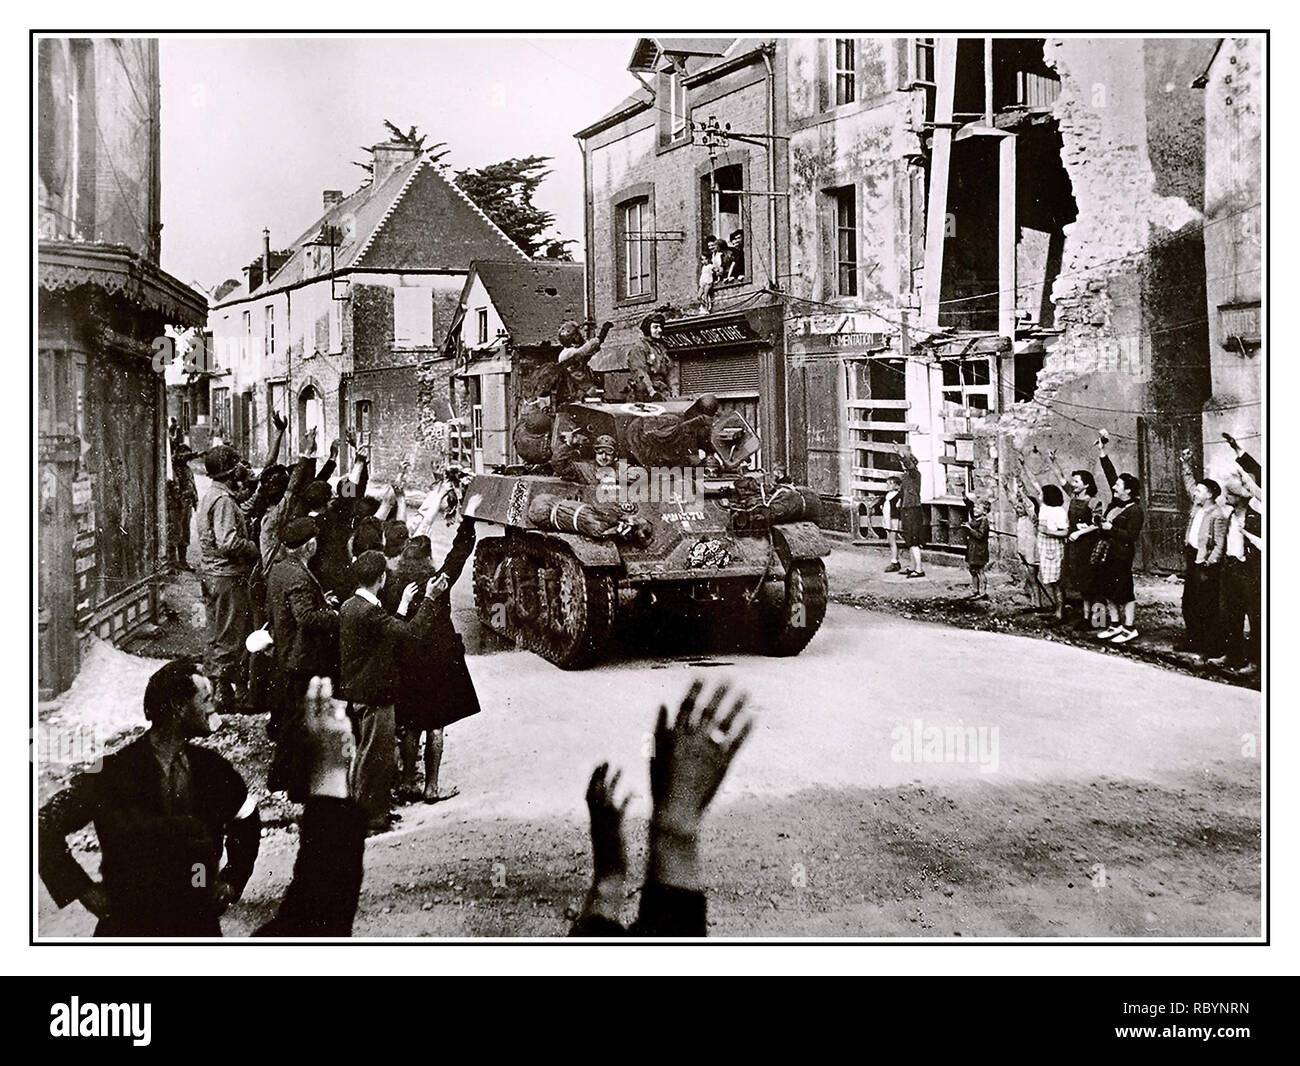 FRENCH LIBERATION WW2 French tank armoured column bearing Free French Cross passing through the small French town of St Mere Eglise 6 June 1944 villagers enthusiasticaly  cheer tankists of the 2e Division Blindée as they enter Sainte Mére-Eglise France August 24 1944. Stock Photo